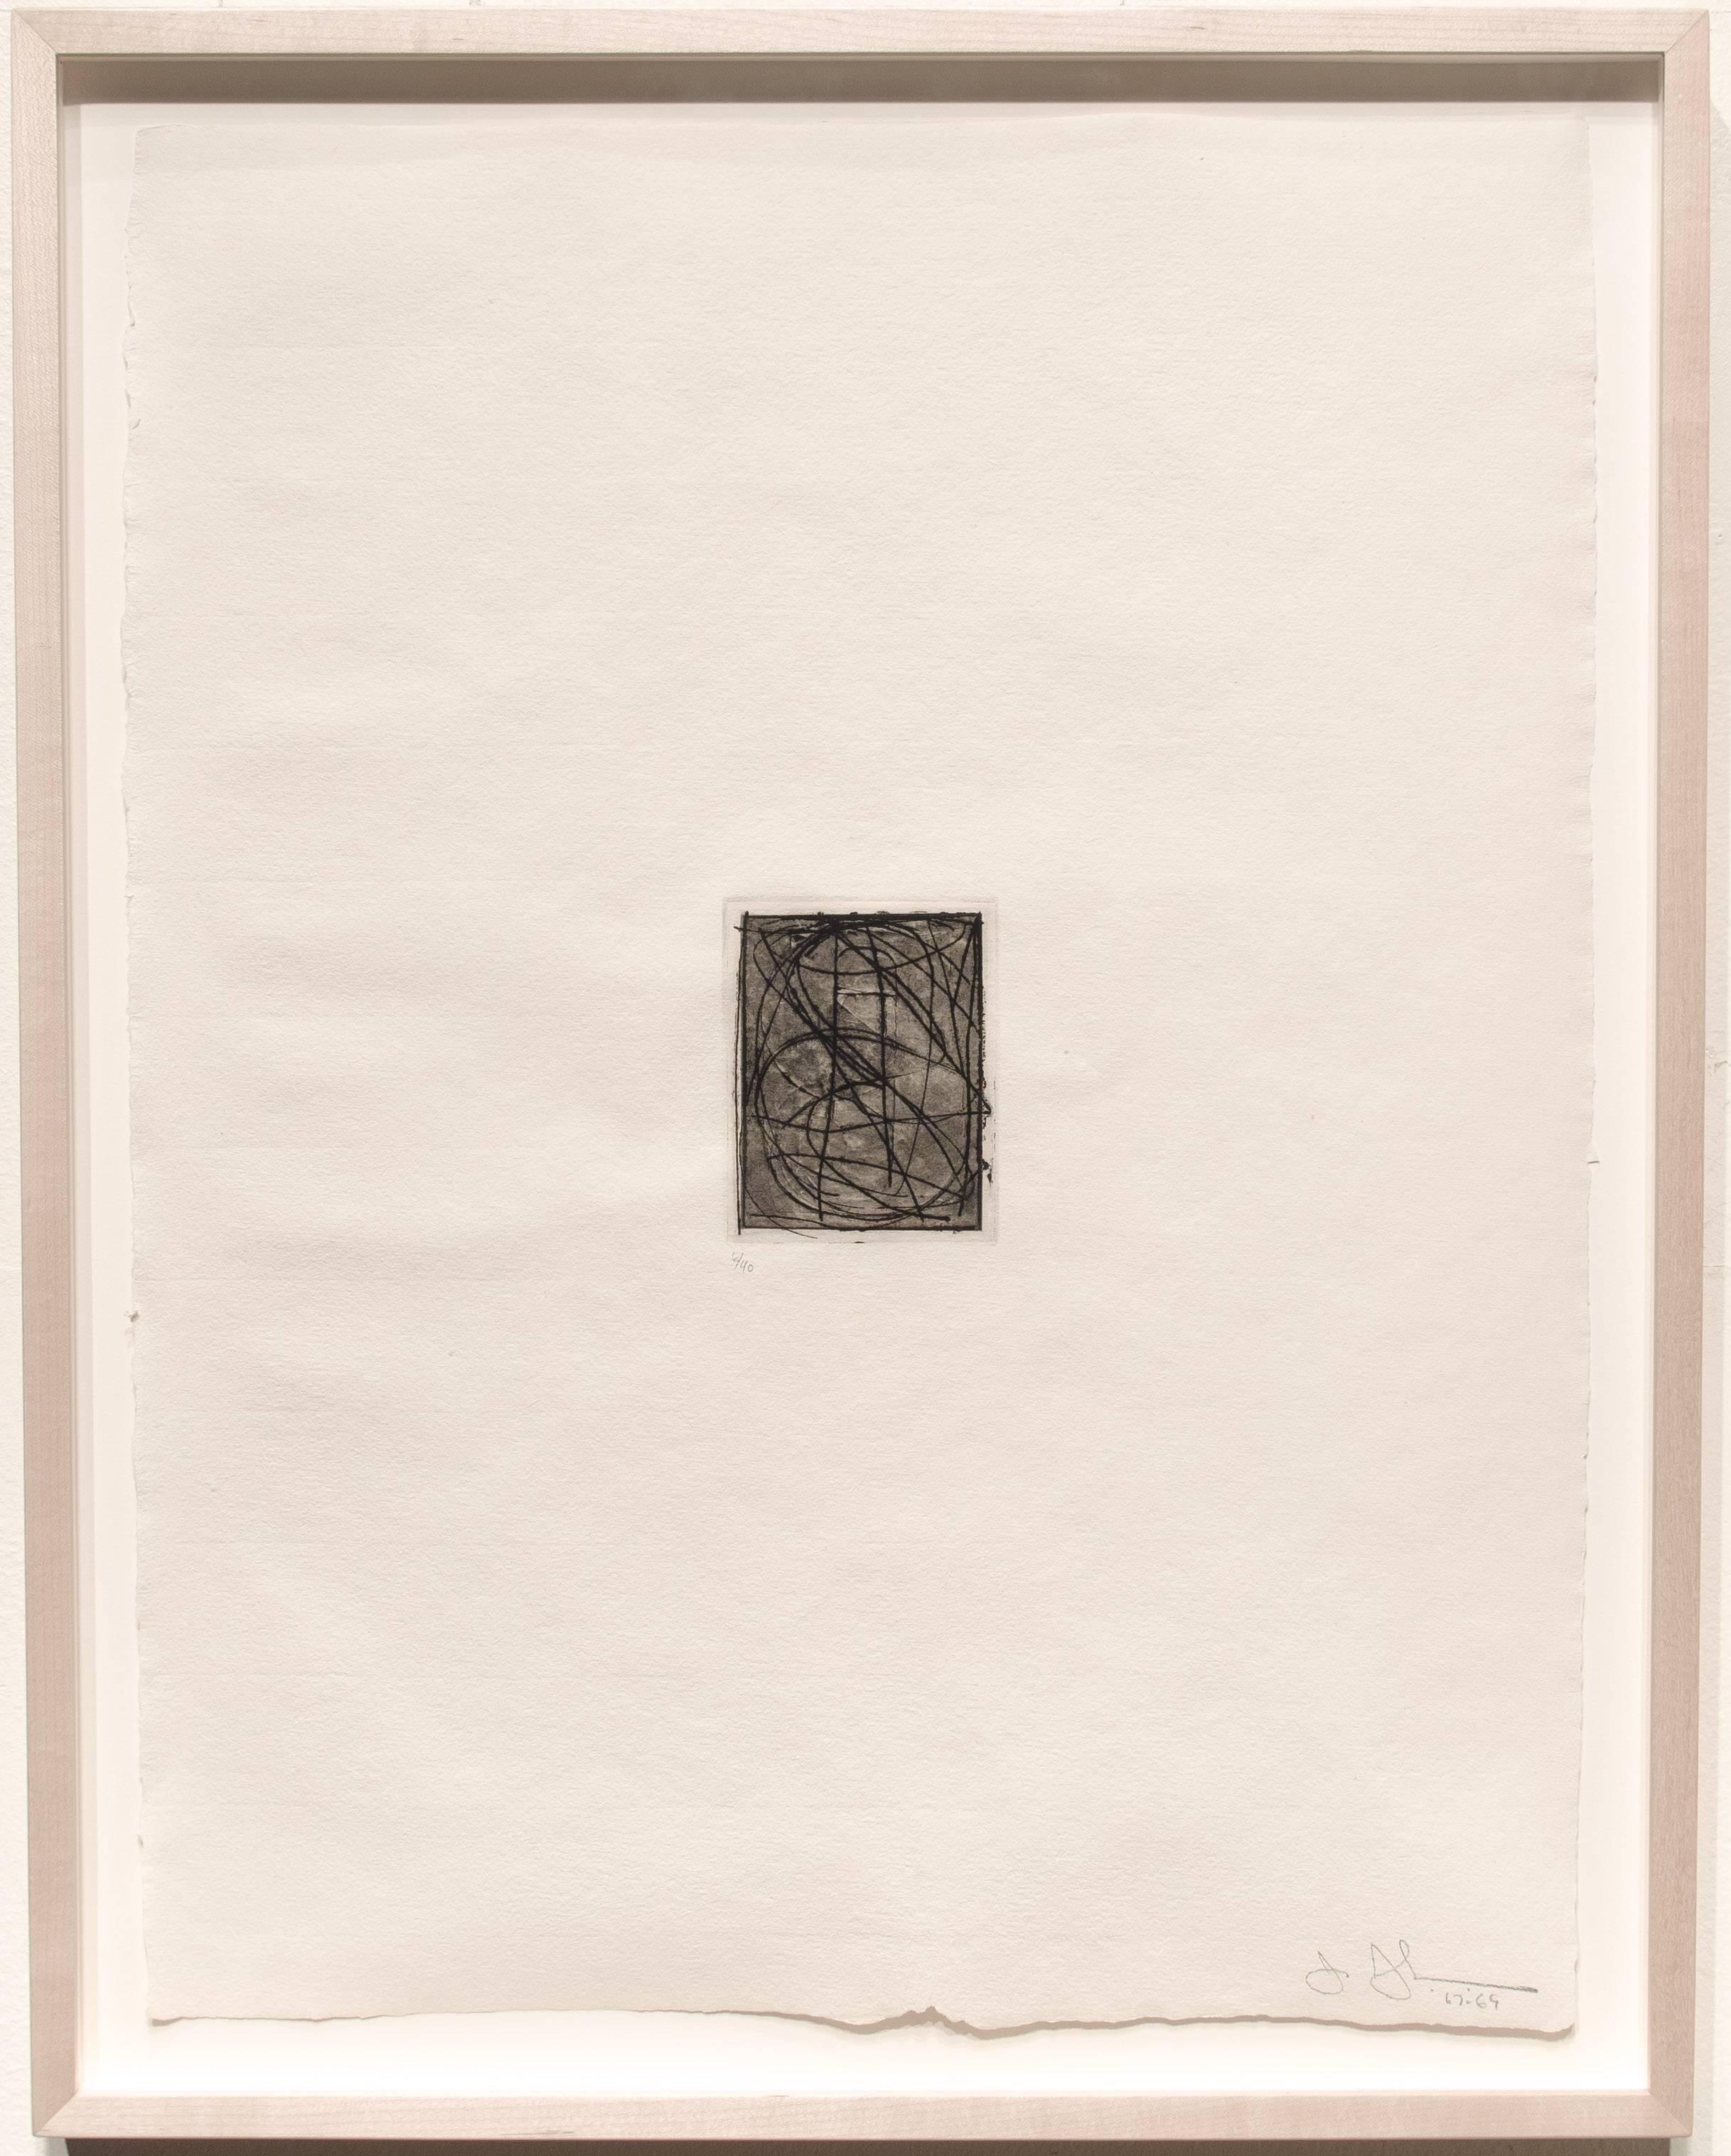 Numbers (Small), 1st Etchings, 2nd State - Contemporary Print by Jasper Johns